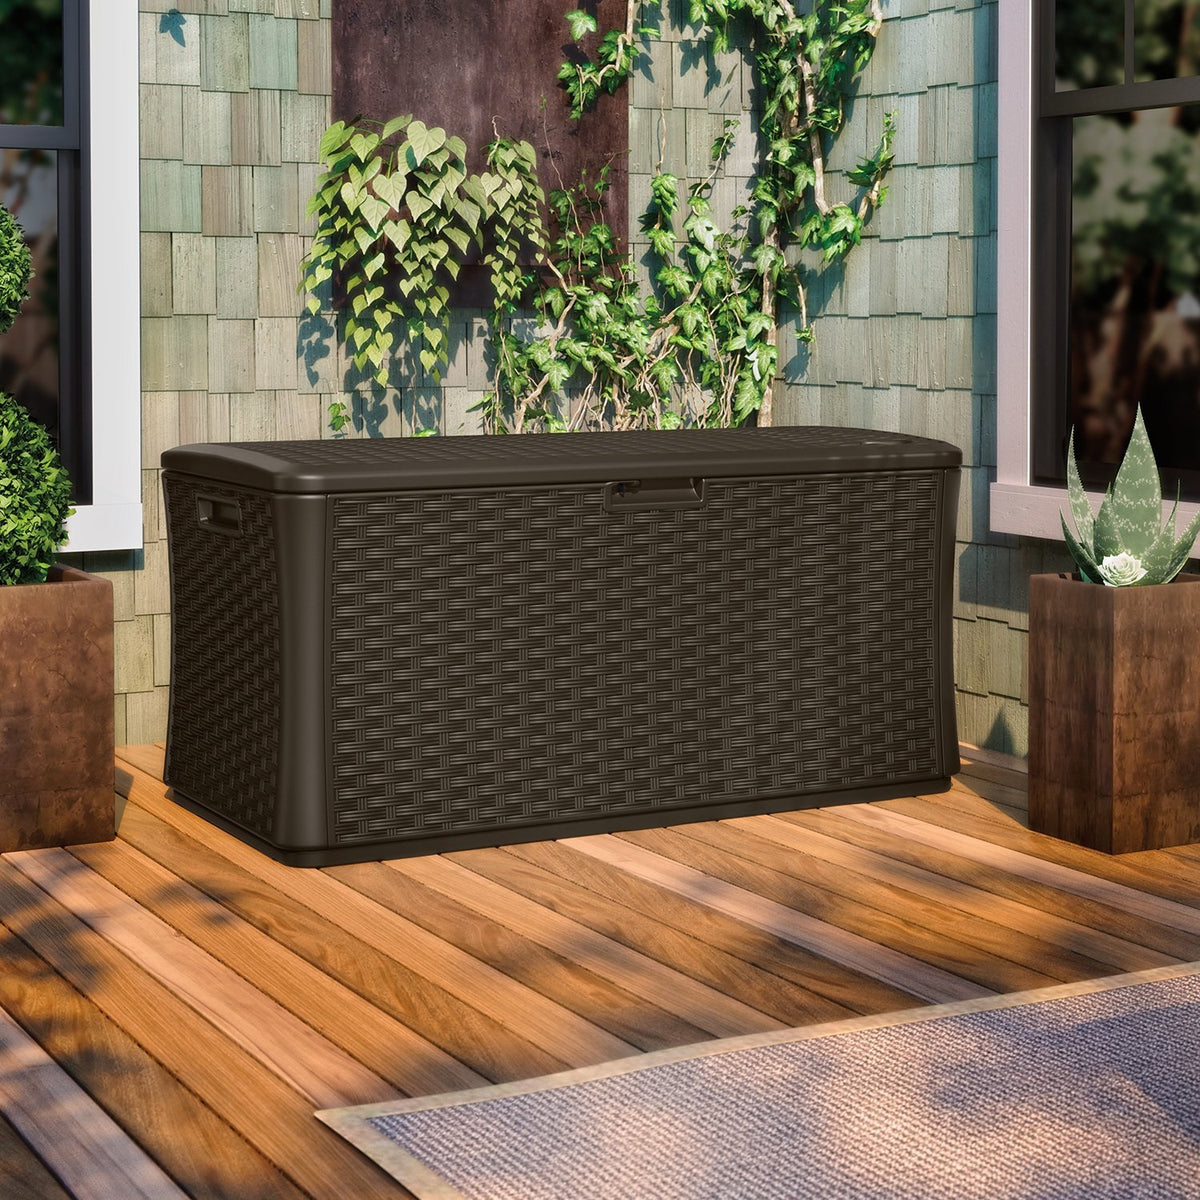 Buy suncast 134 gallon - Online store for outdoor living, deck boxes in USA, on sale, low price, discount deals, coupon code